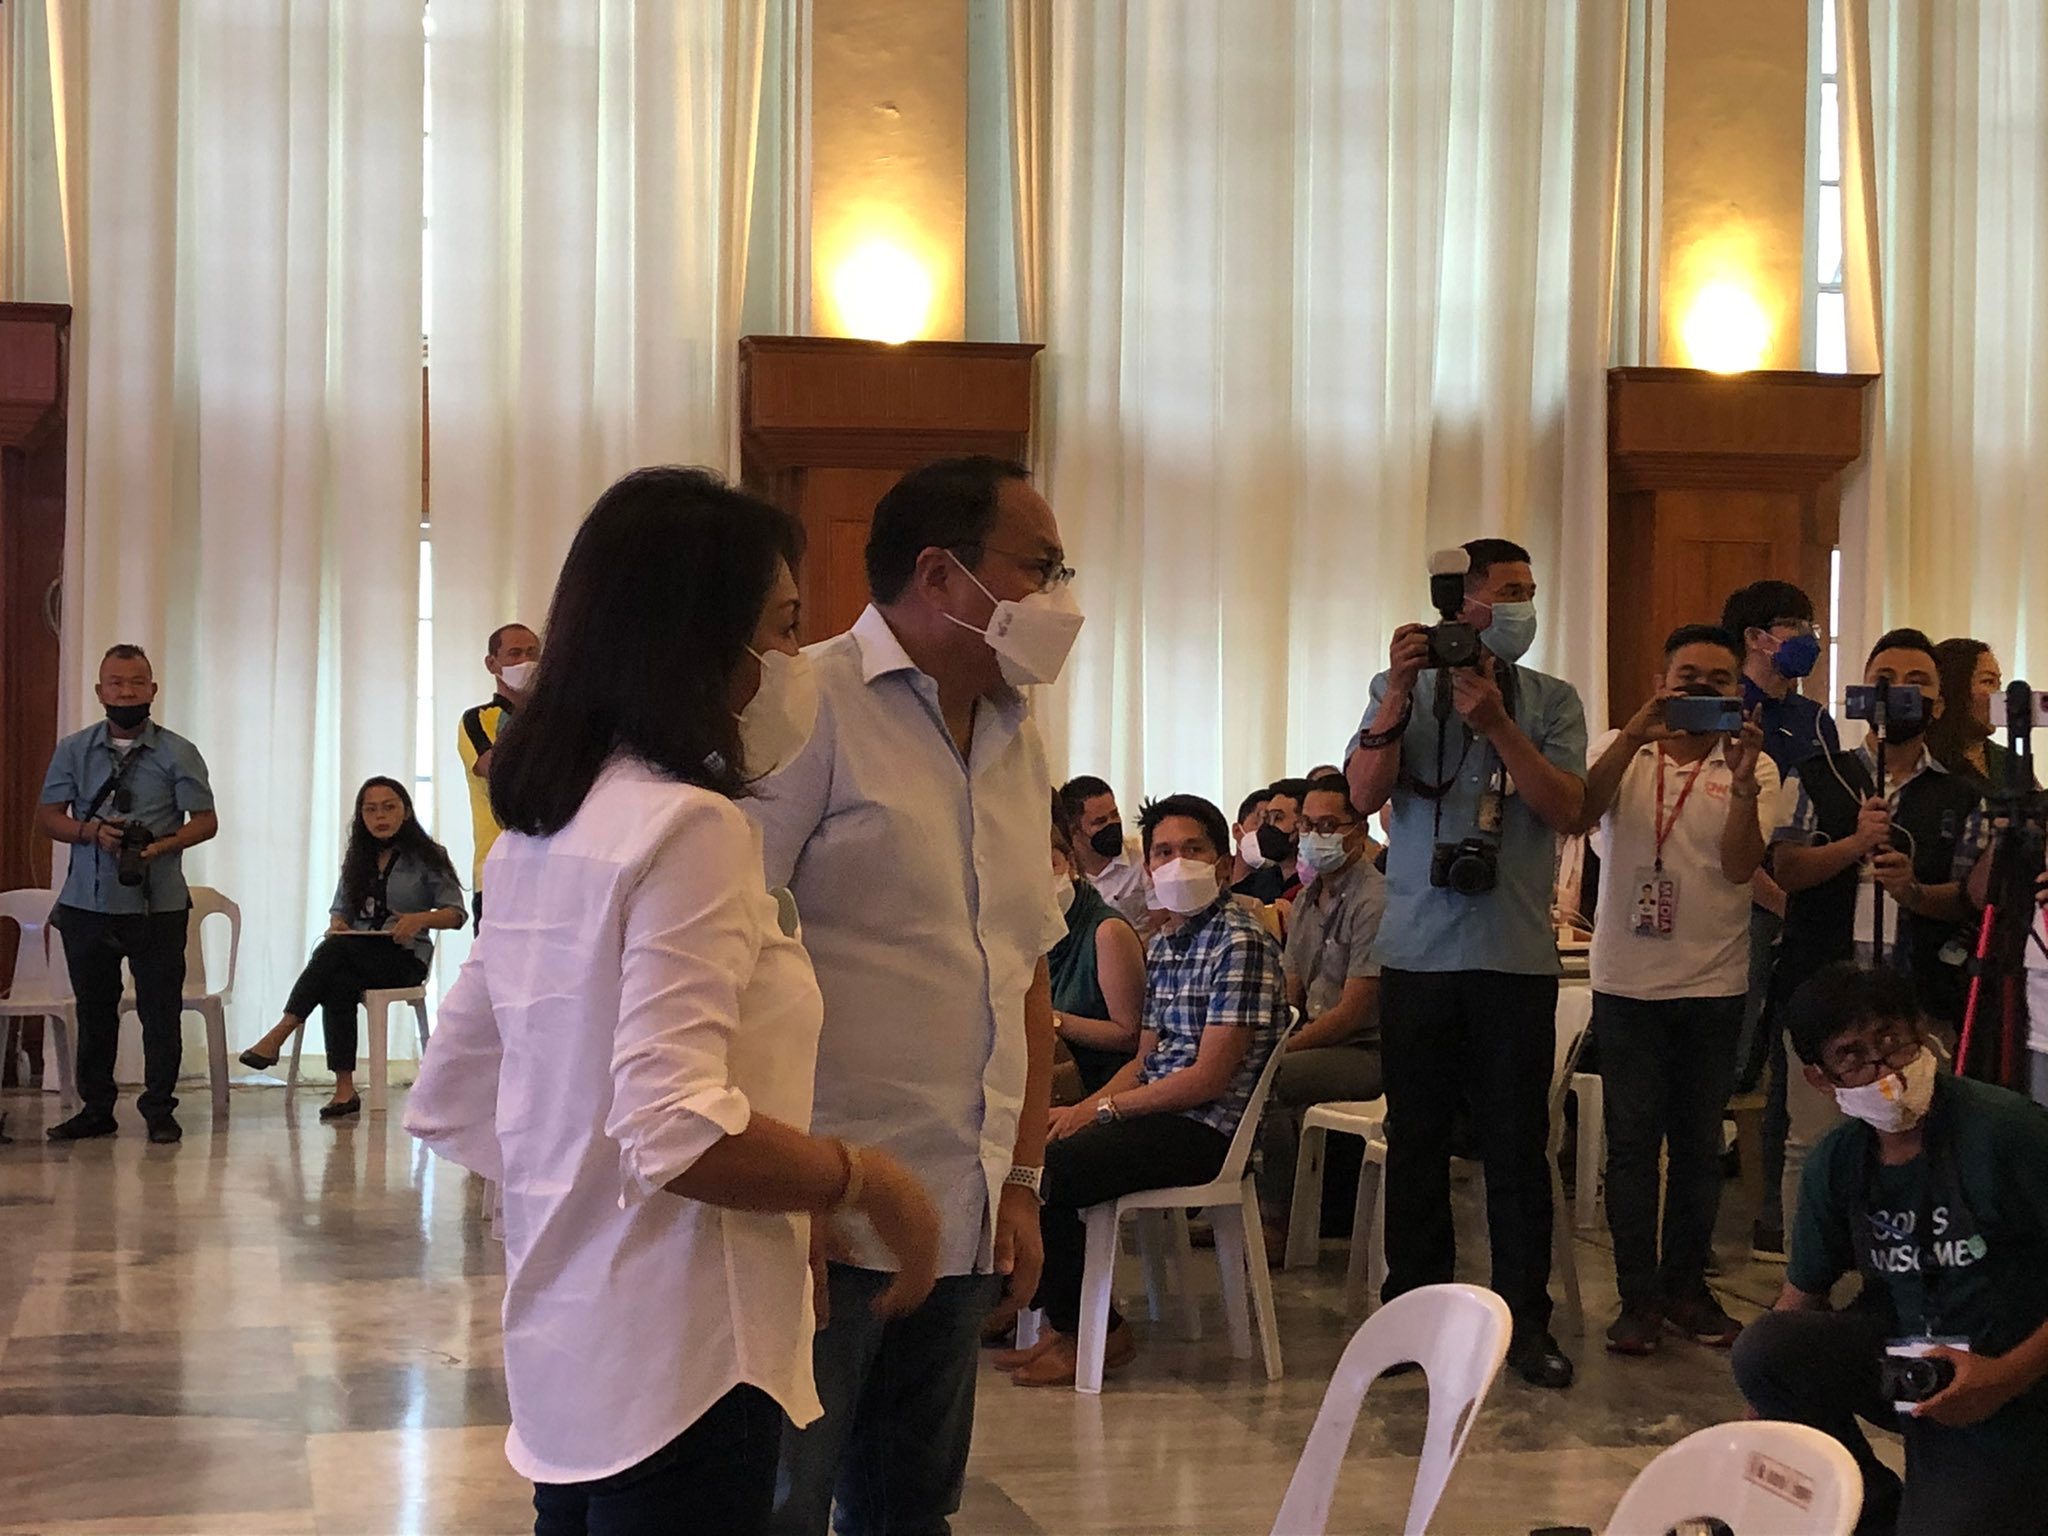 Incumbent Gwen Garcia beats Ace Durano by landslide for Cebu governor